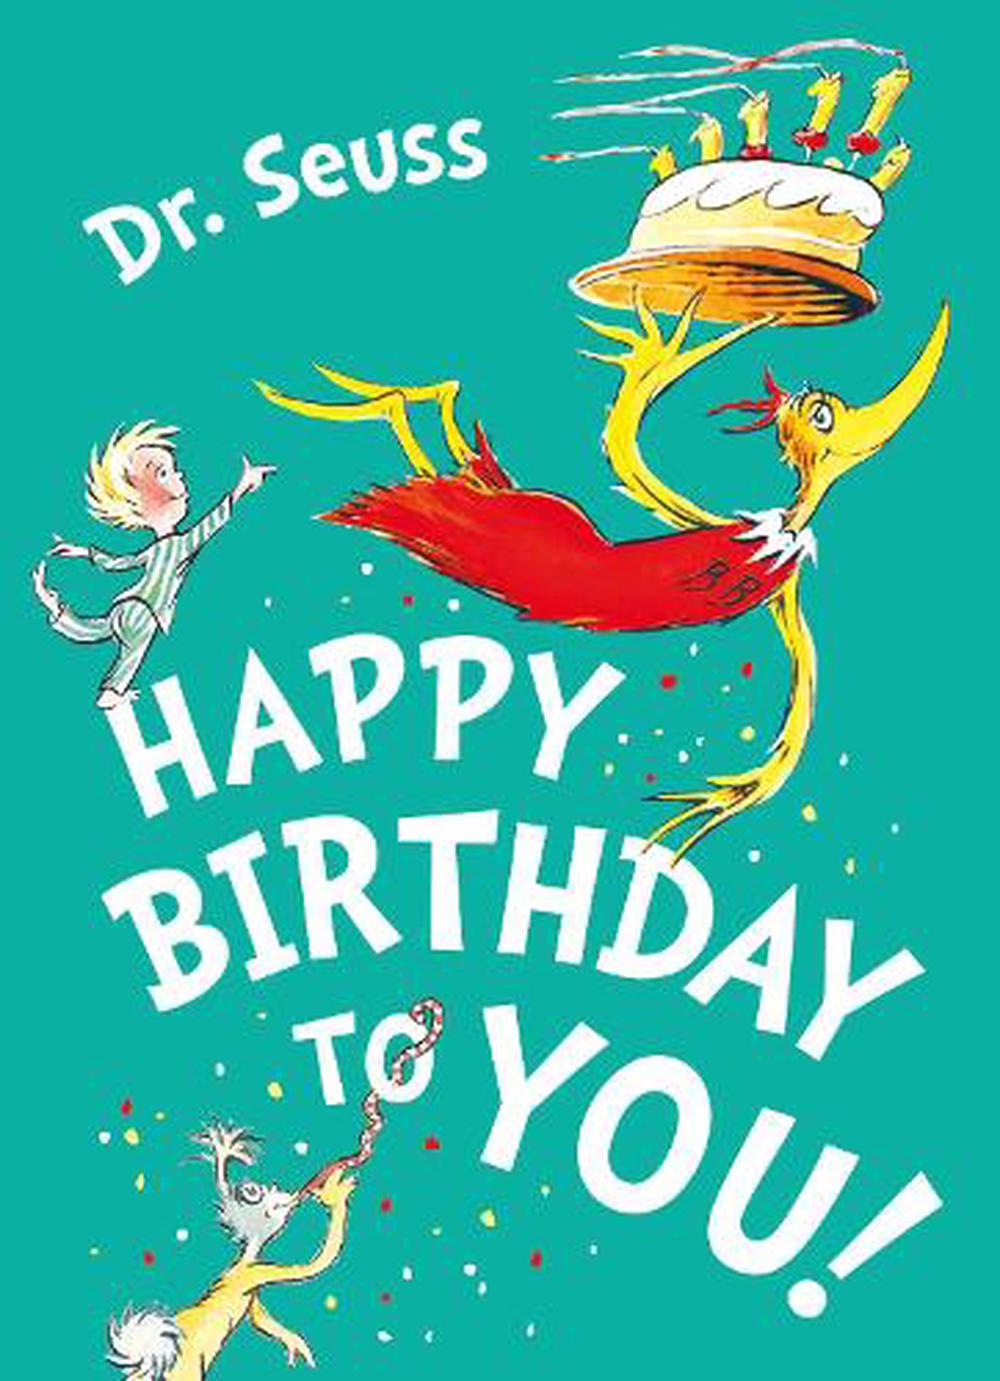 Happy Birthday to You! by Dr. Seuss, Paperback, 9780008473884 | Buy ...